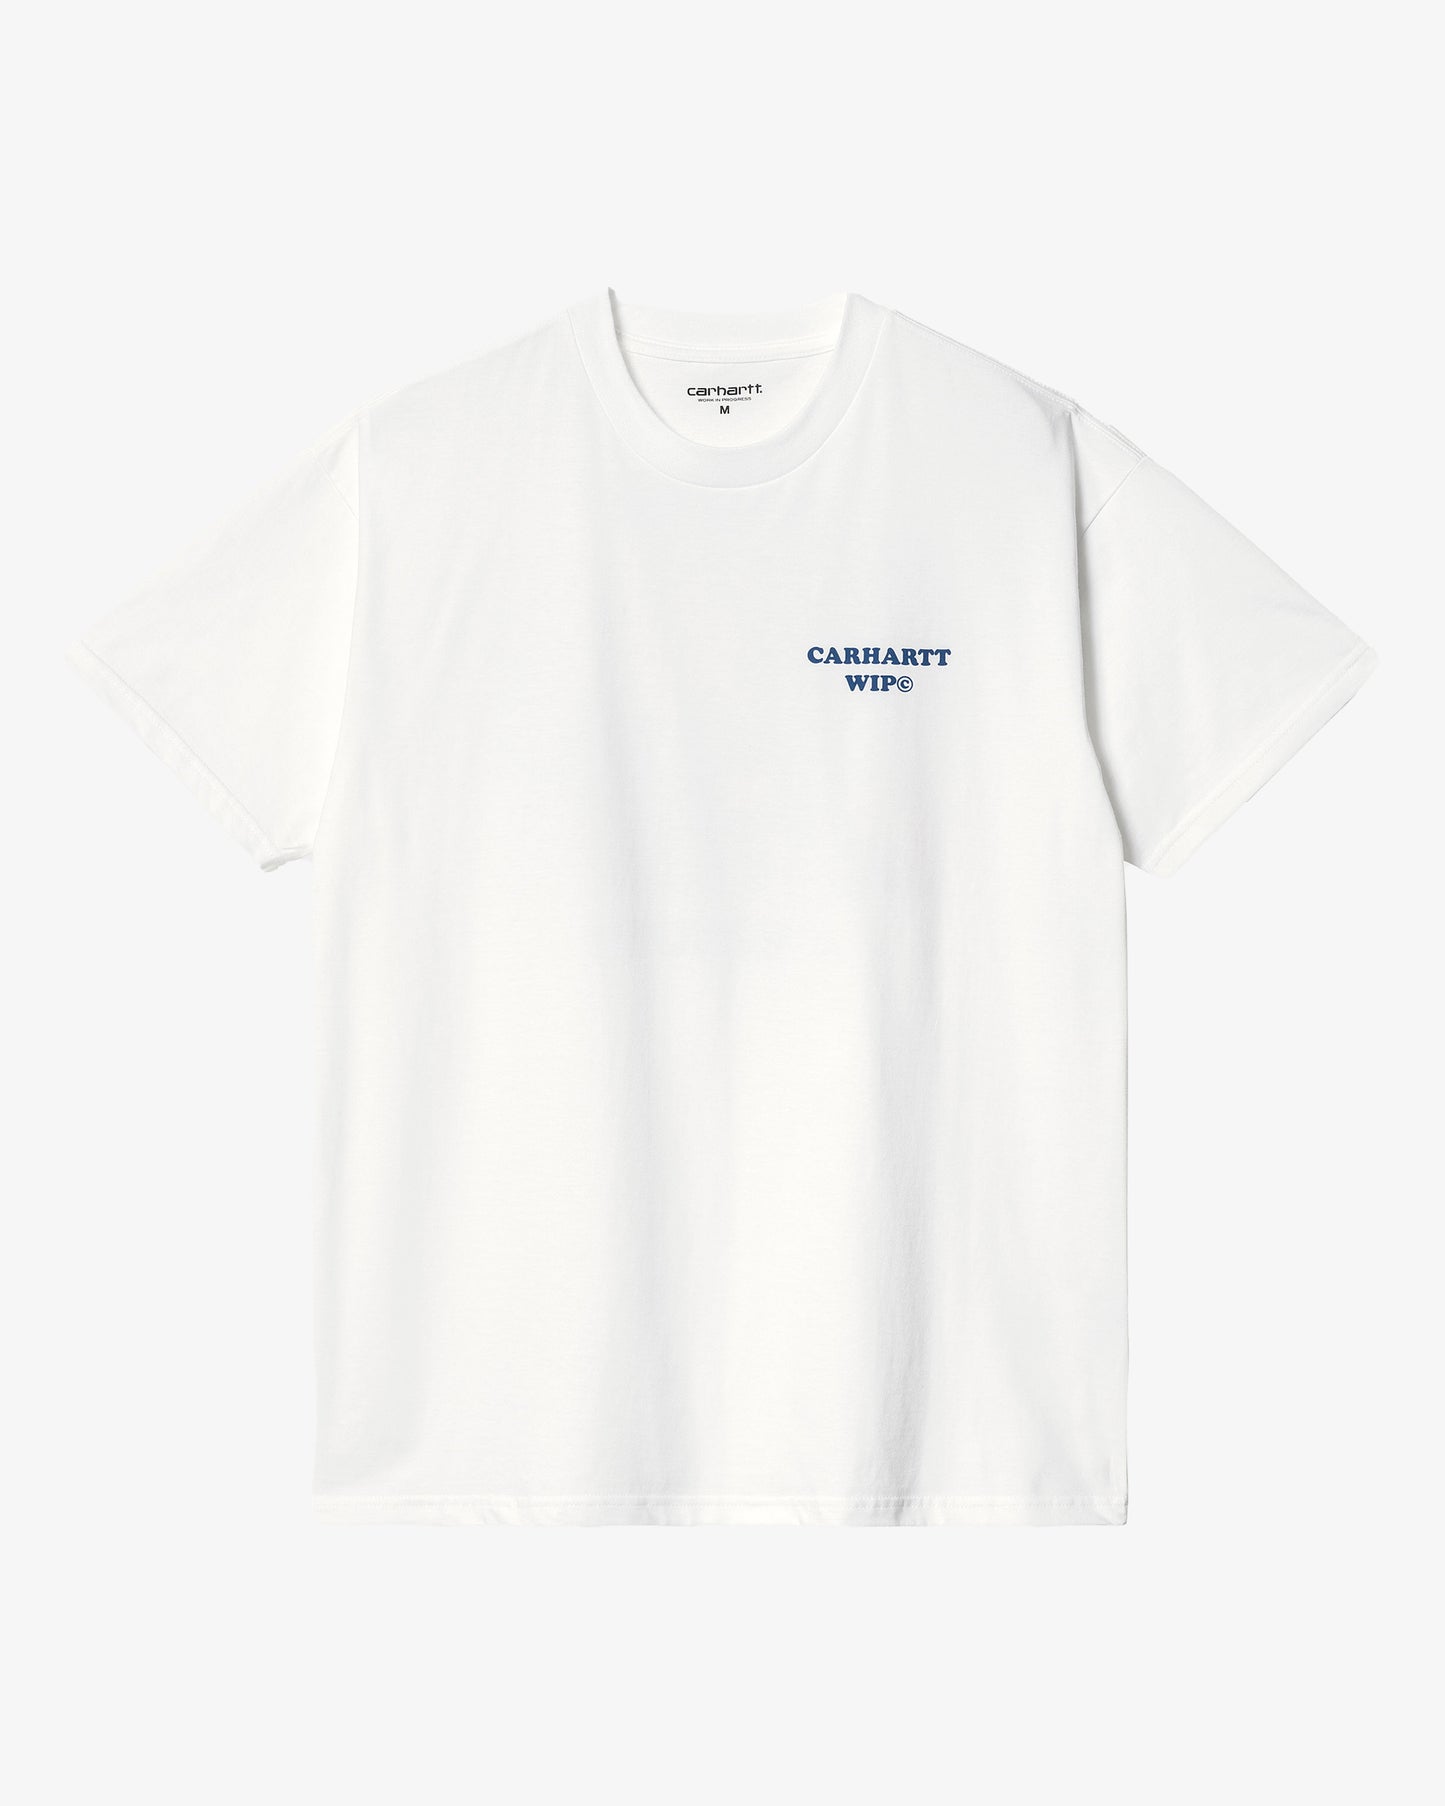 Carhartt WIP S/S Isis Maria Diner T-Shirt